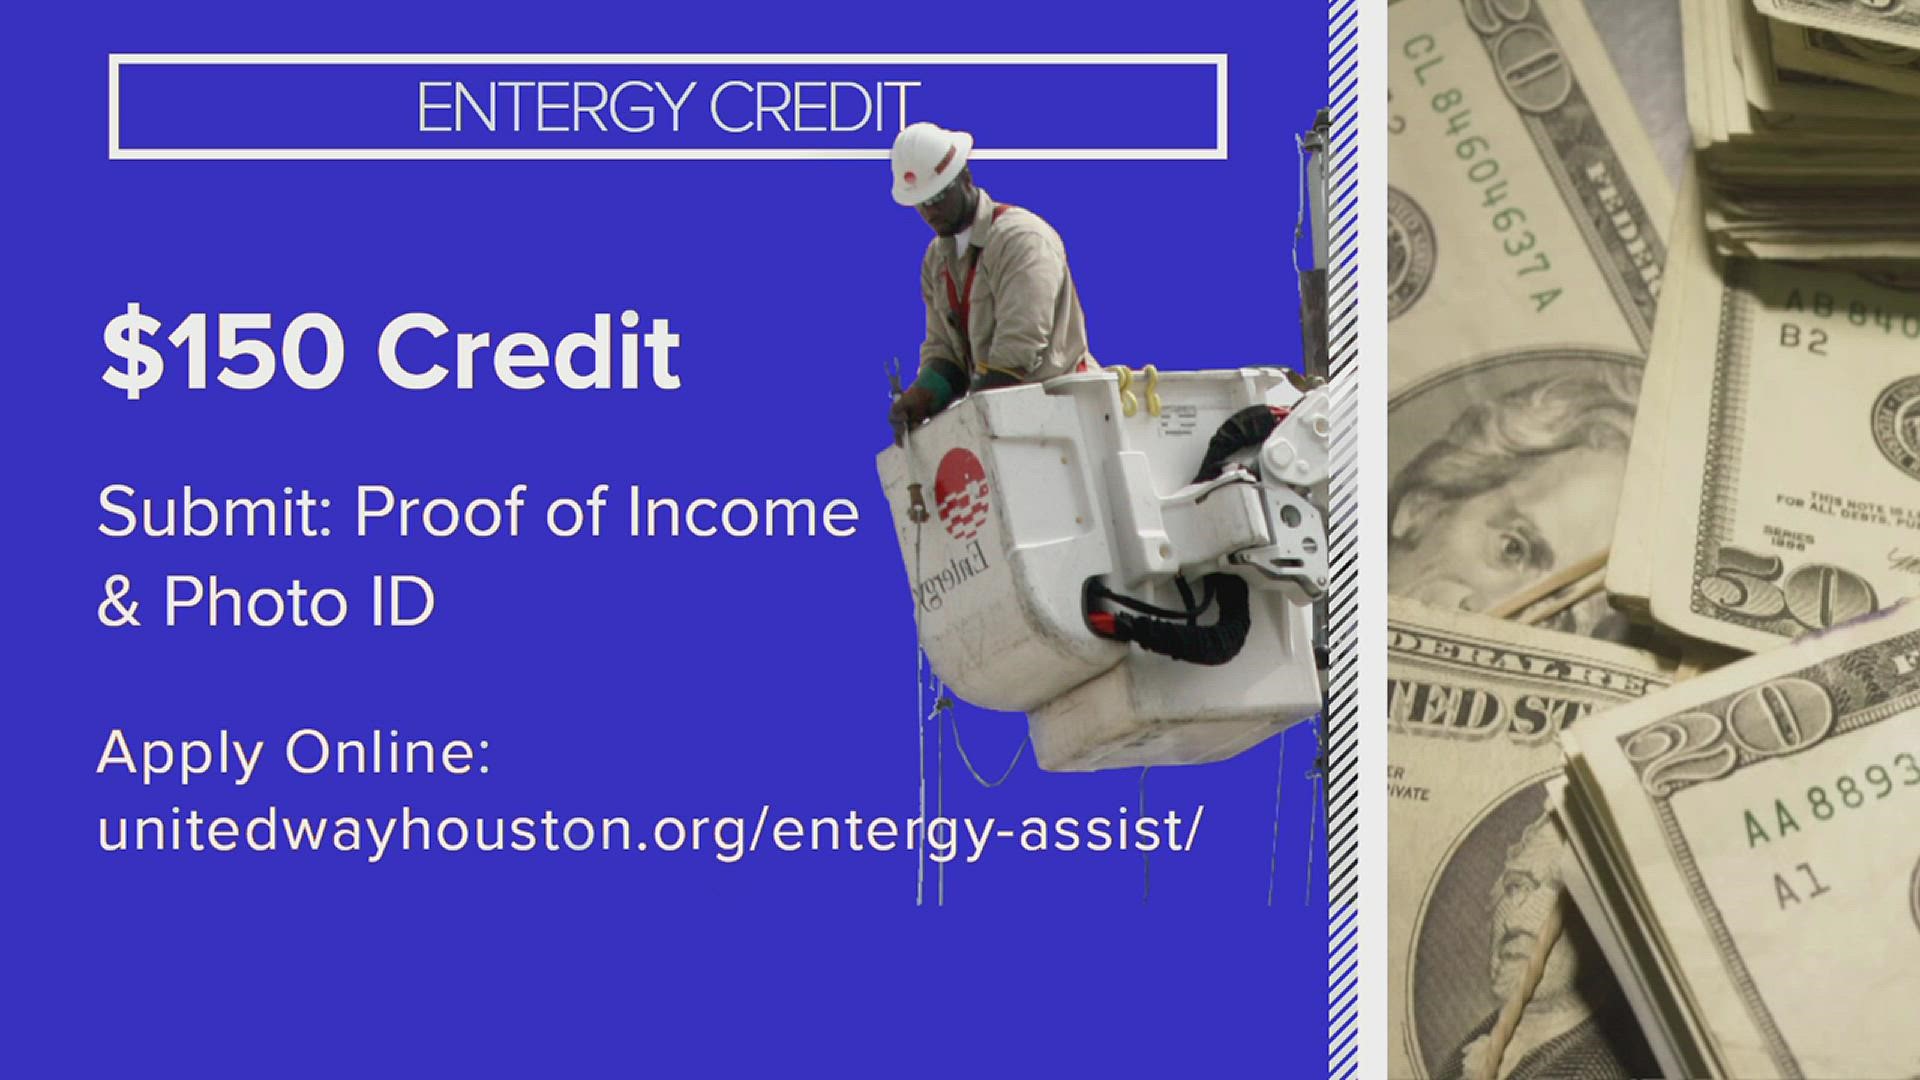 In order to apply you'll need to submit proof of income and a photo ID. Apply here: https://www.unitedwayhouston.org/entergy-assist